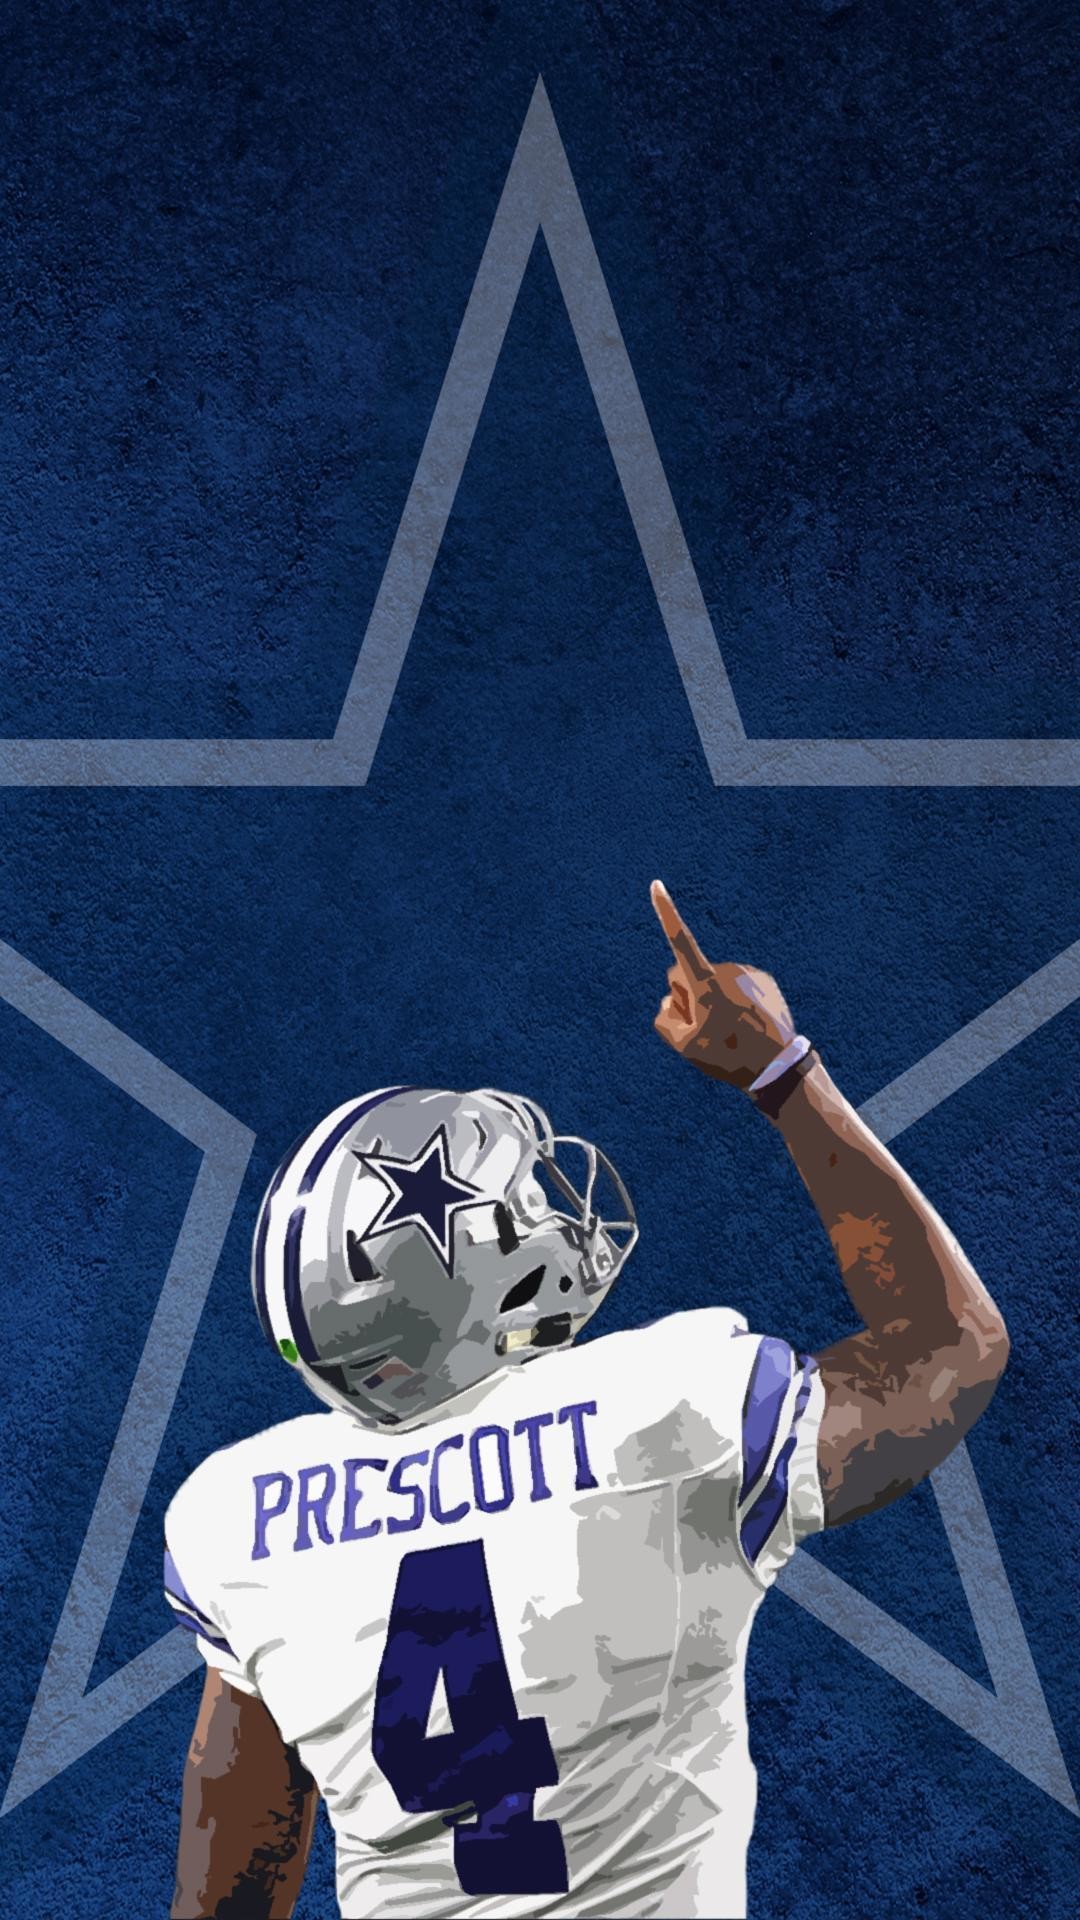 Made This Dak Iphone Wallpaper If Anyone Wants To Use - Dak Prescott Wallpaper Iphone - HD Wallpaper 